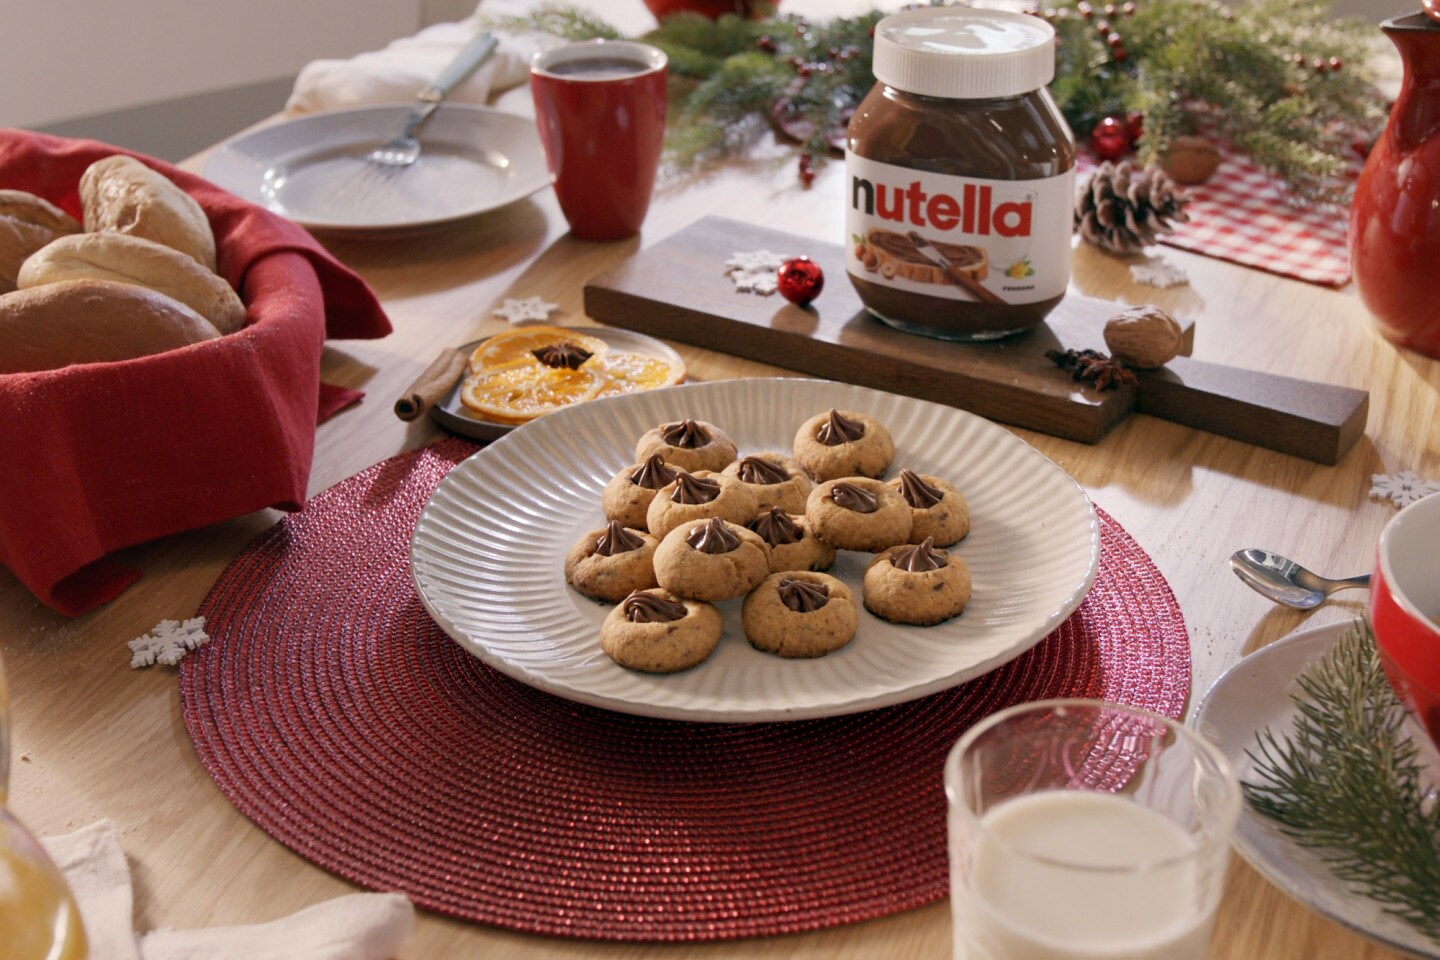 thumbprint_cookies_by_nutella_recipe_.pos details united states